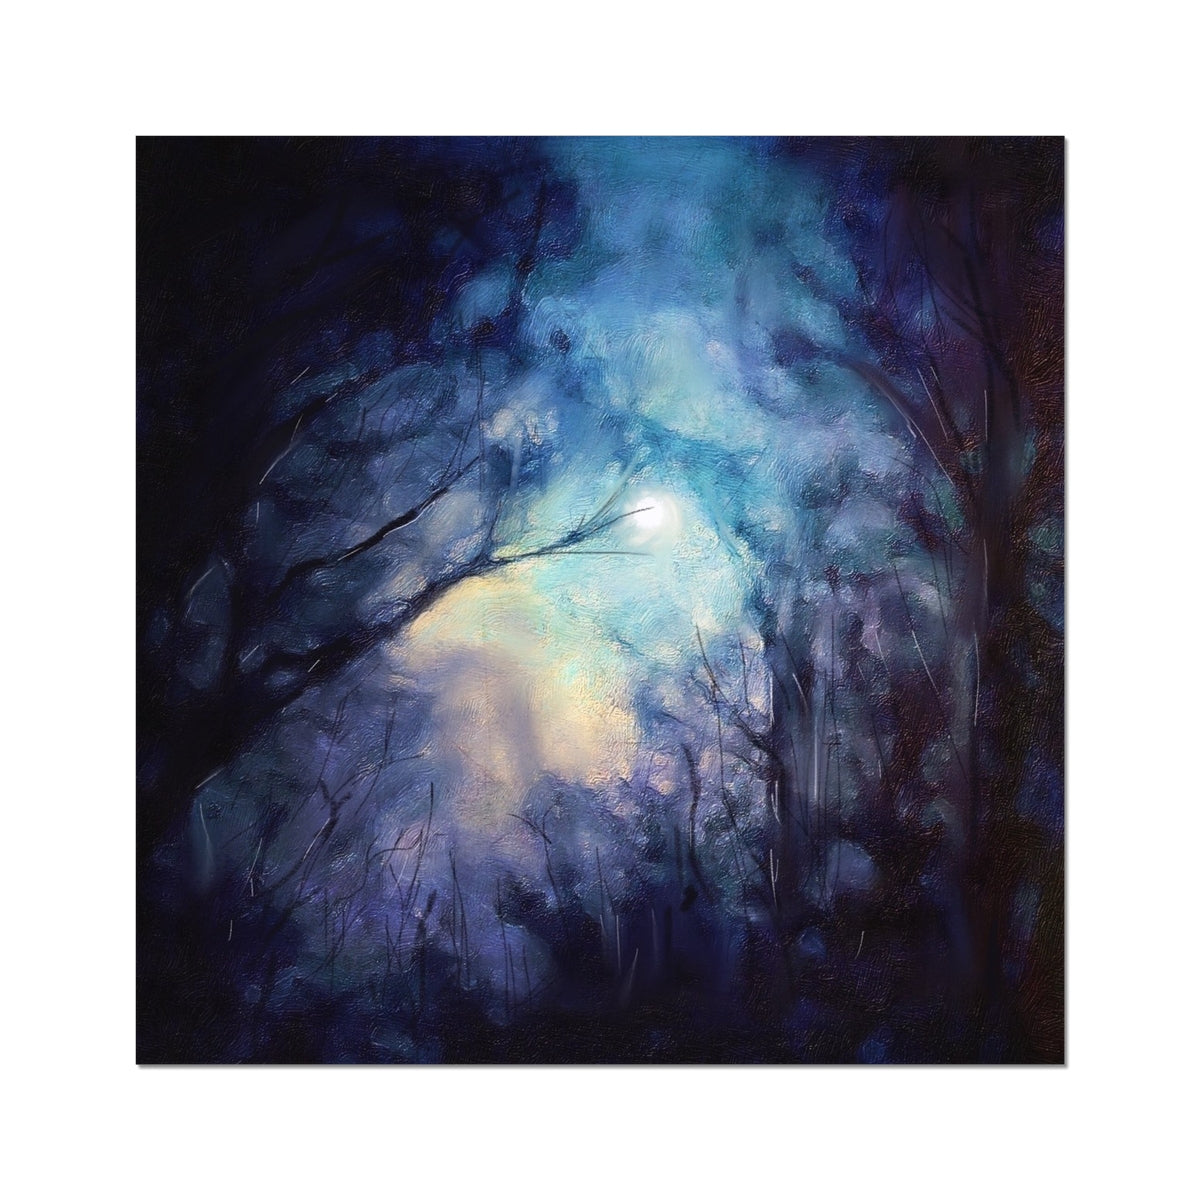 A Moonlit Highland Wood Painting | Fine Art Prints From Scotland-Unframed Prints-Scottish Highlands & Lowlands Art Gallery-24"x24"-Paintings, Prints, Homeware, Art Gifts From Scotland By Scottish Artist Kevin Hunter